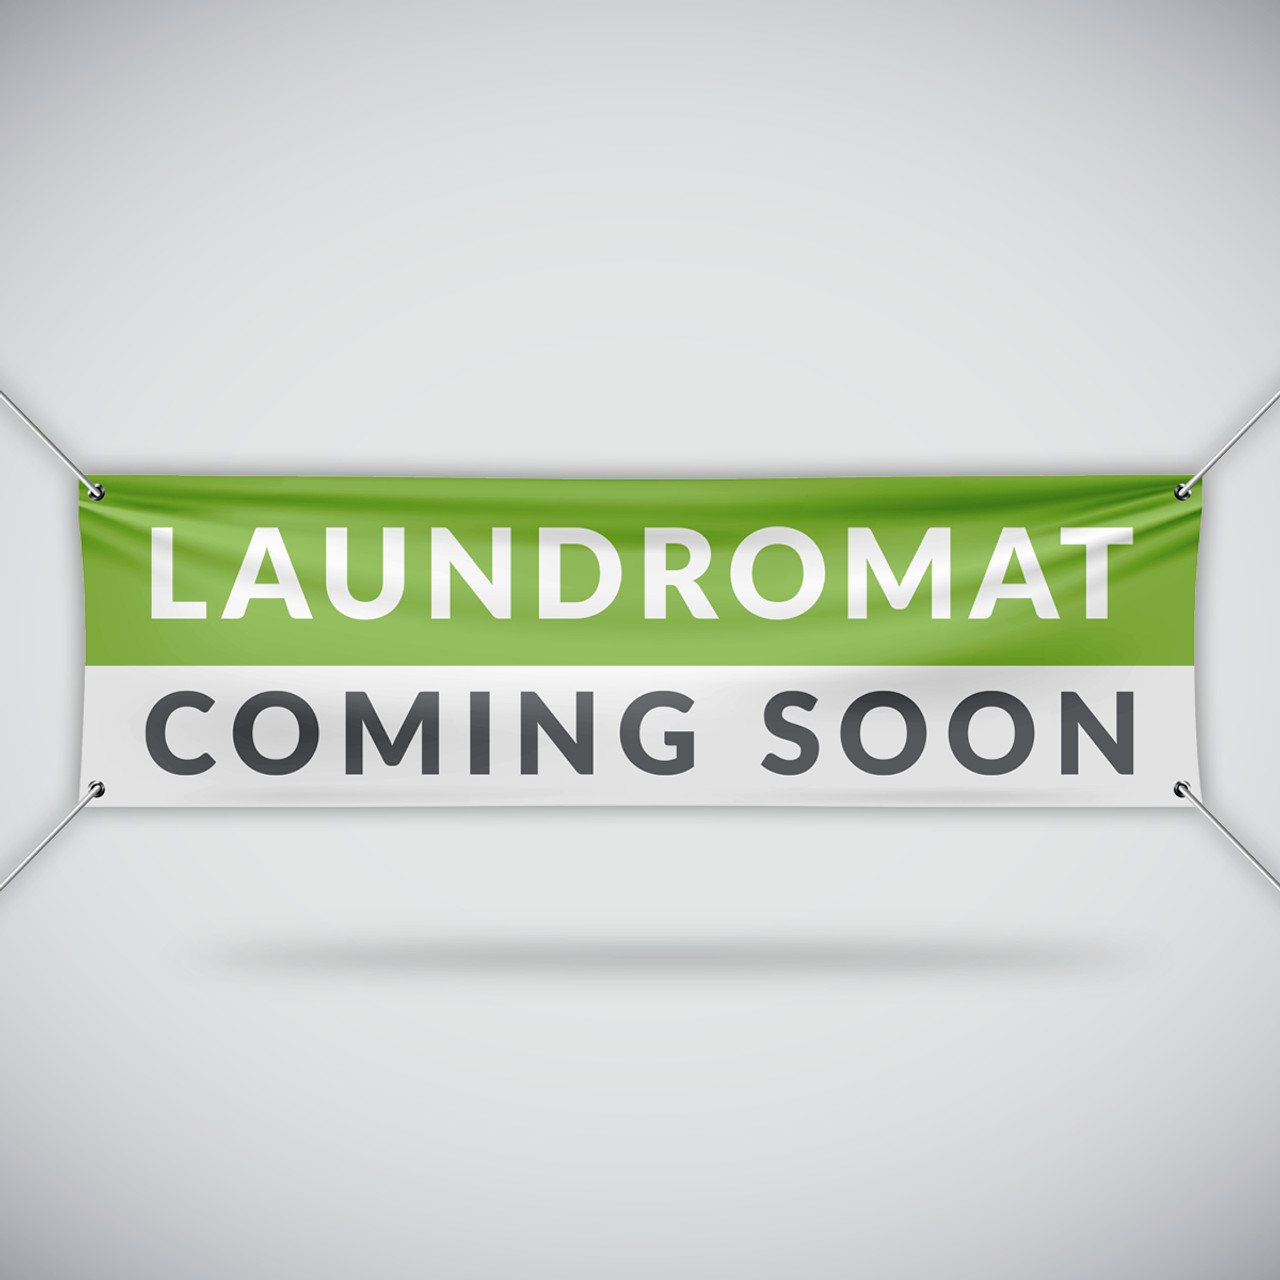 Laundromat Coming Soon Banner - Green